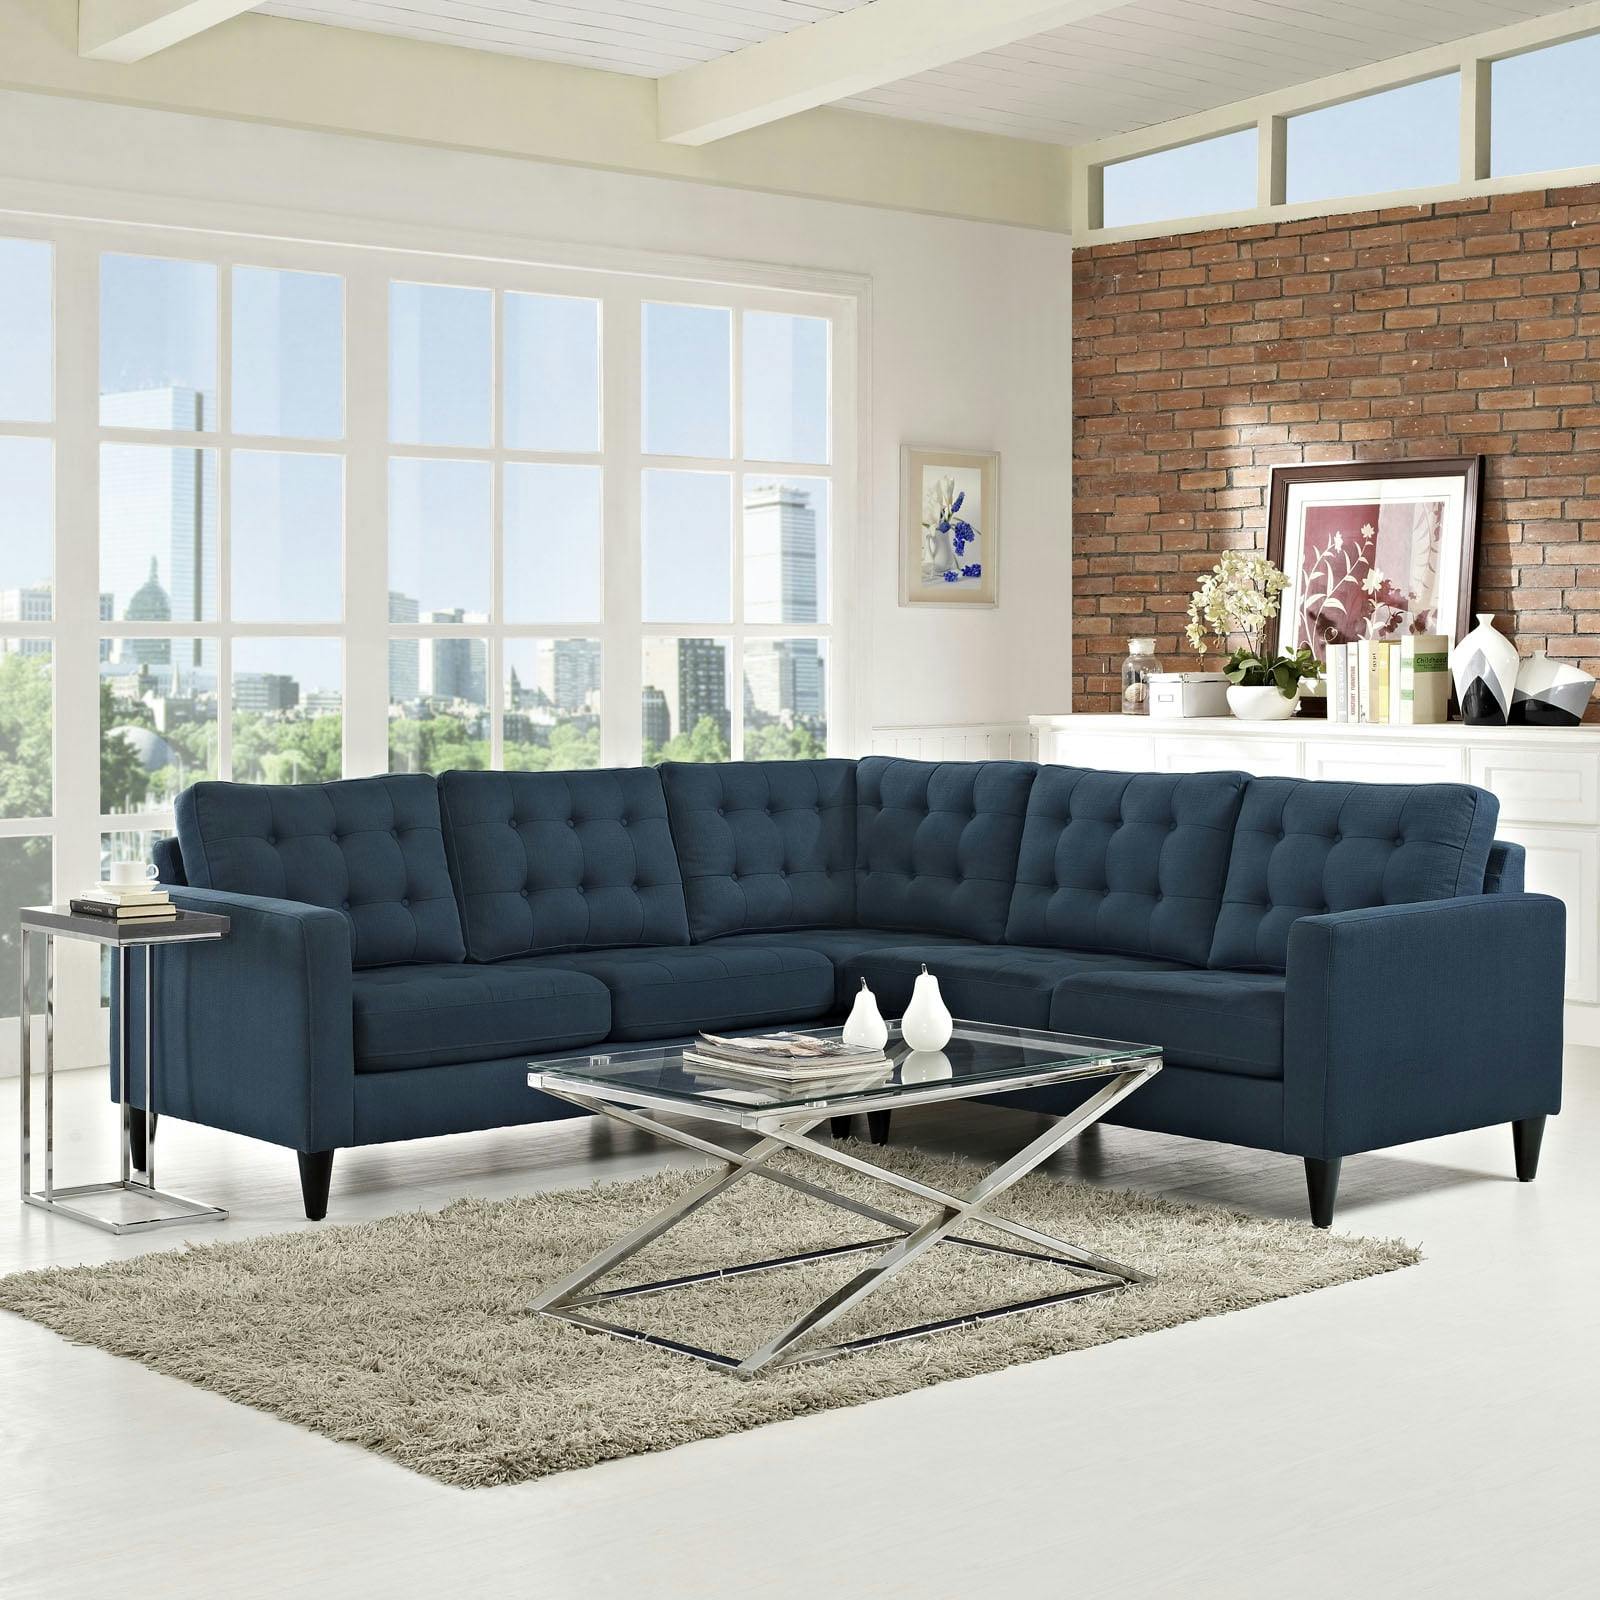 Azure Elegance 100'' Tufted Fabric Sectional Sofa with Wood Accents